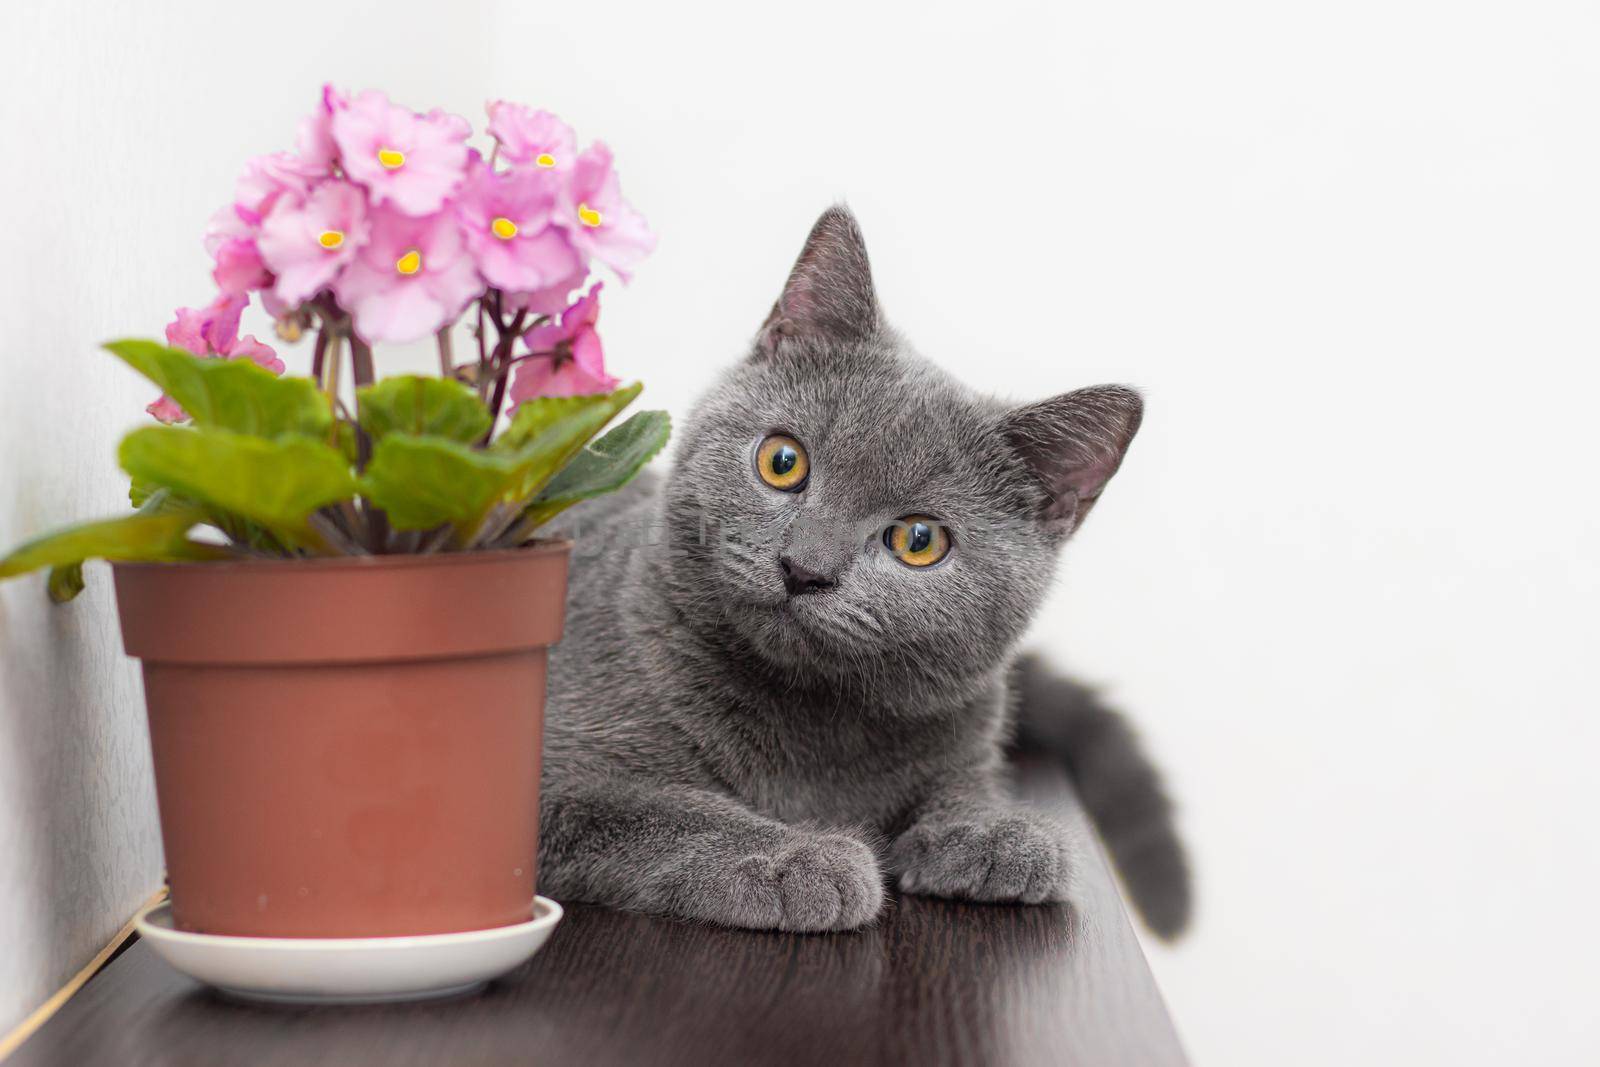 Cat and home flower in a pot . Nursling. Article about animals and home flowers. Harm of home flowers for cats. Grey British cat